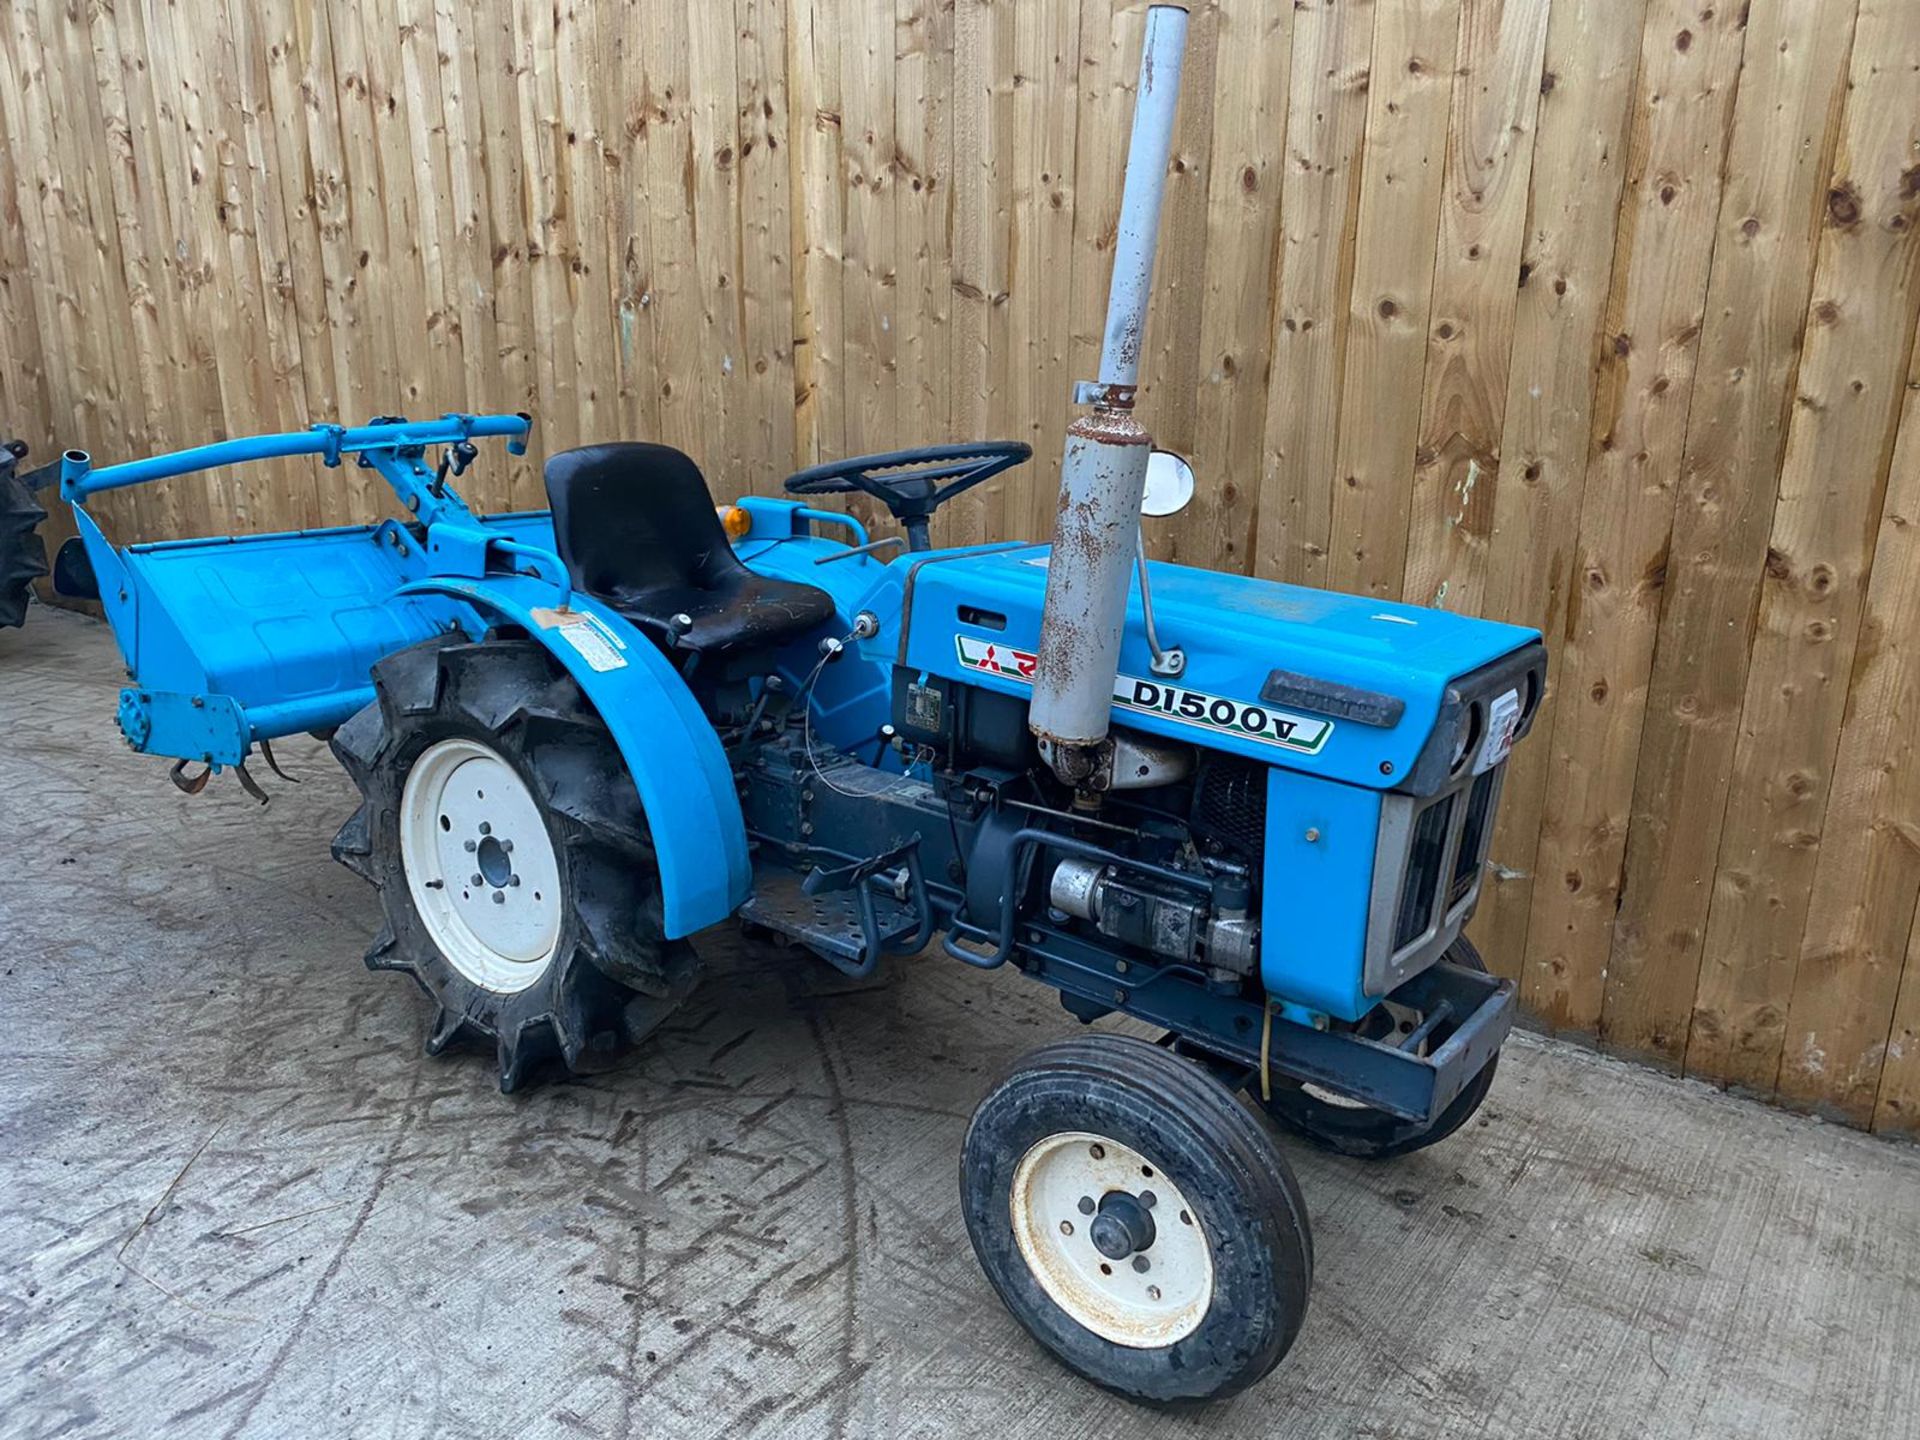 MITSUBISHI D1500V COMPACT TRACTOR & ROTOVATOR, STARTS, RUNS AND DRIVES & WORKS WELL *PLUS VAT*